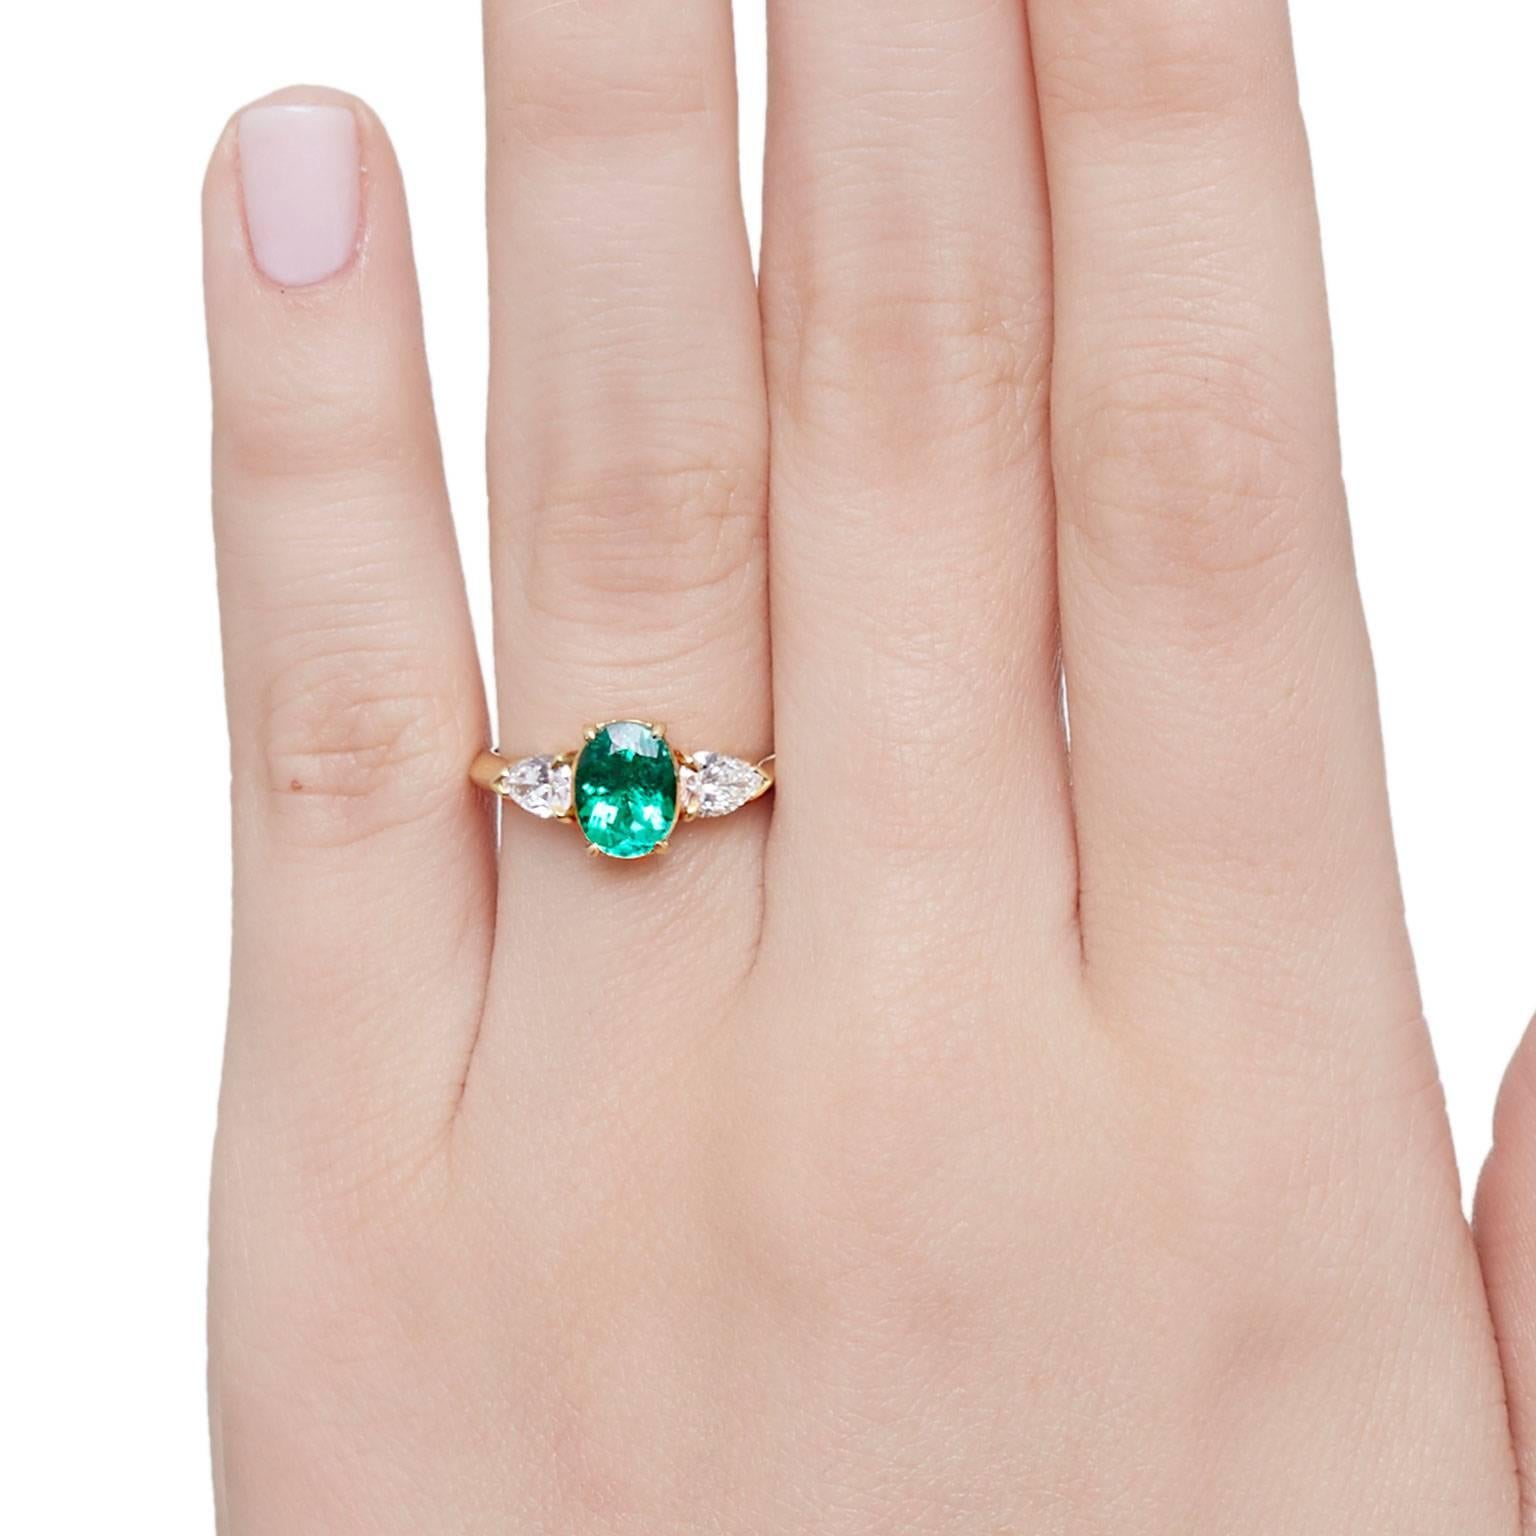 Modern Cushla Whiting 1.1 Carat Certified Muzo Emerald 'Verde' Ring with Diamonds For Sale